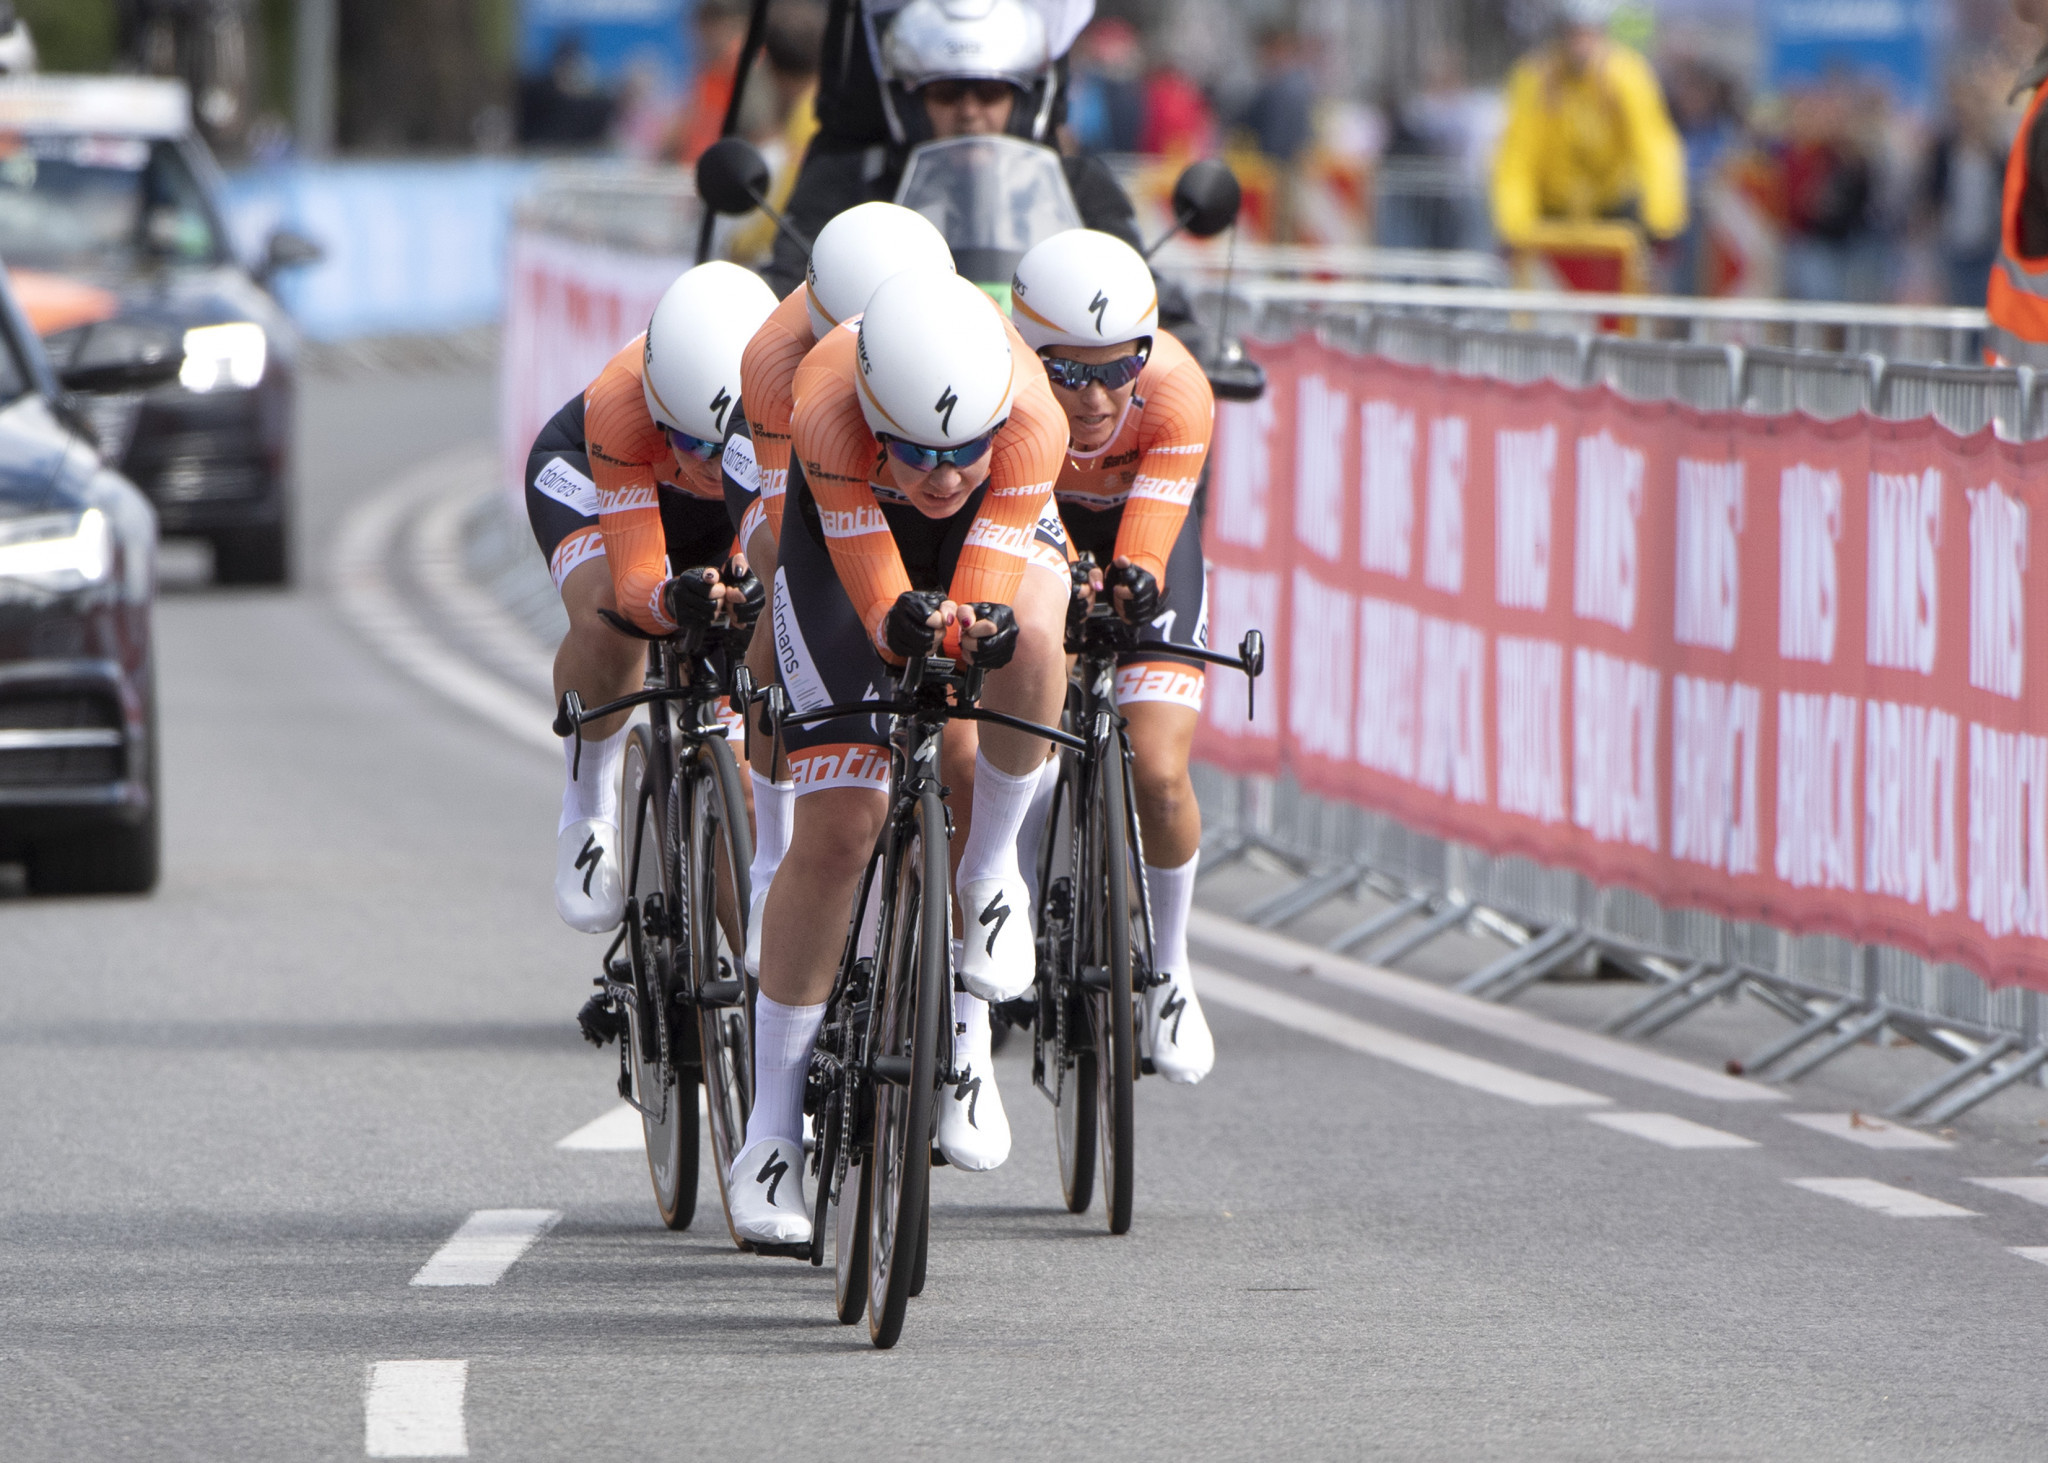 The UCI Women’s World Tour is due to resume tomorrow with Boels-Dolmans looking to claim a fourth consecutive title at the Postnord Vårgårda WestSweden team time trial event ©Getty Images